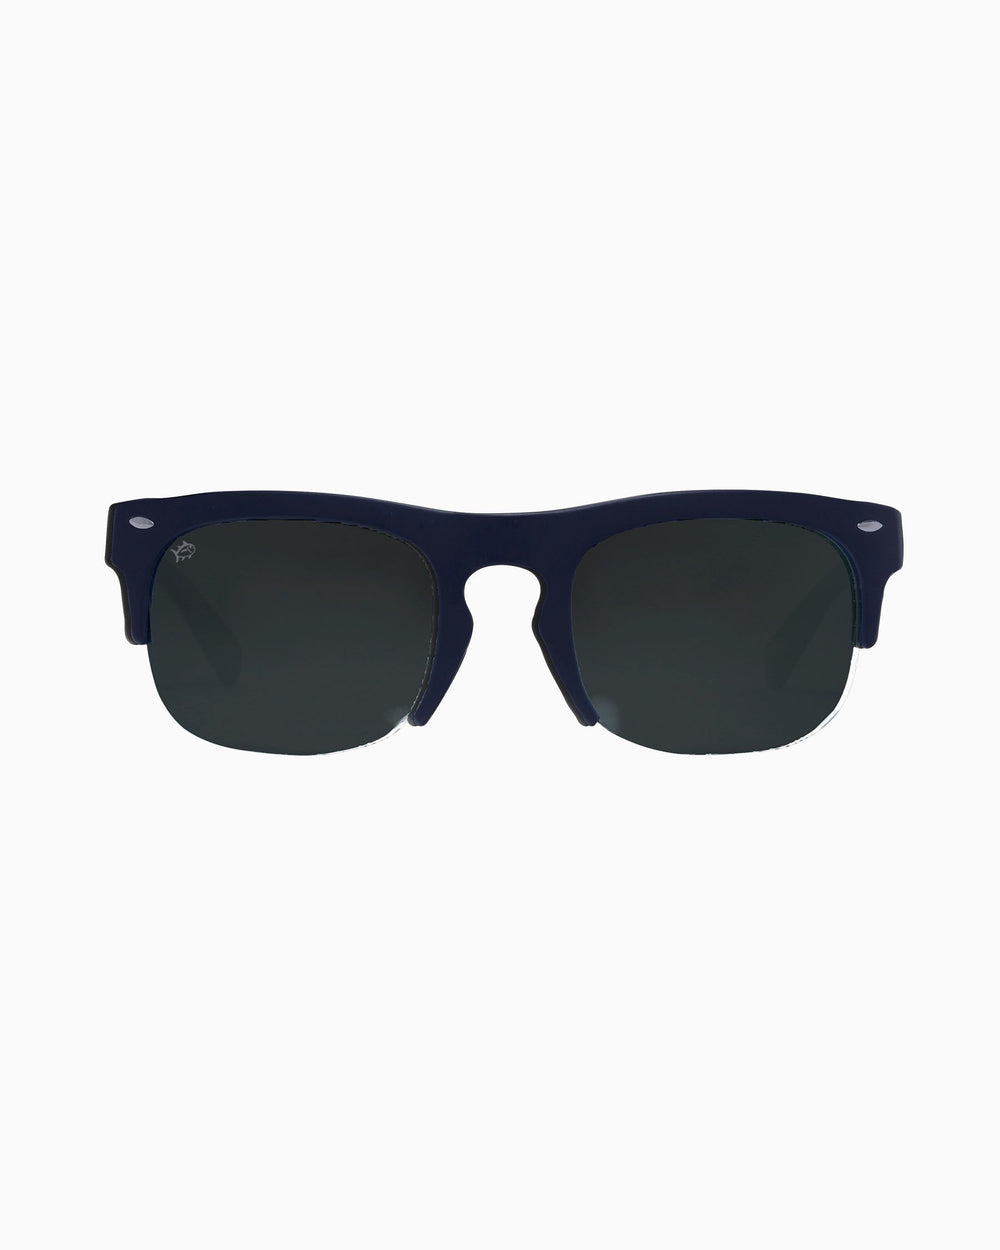 The front of the Men's Rheos Sullivans Sunglasses by Southern Tide - Boat Blue Marine